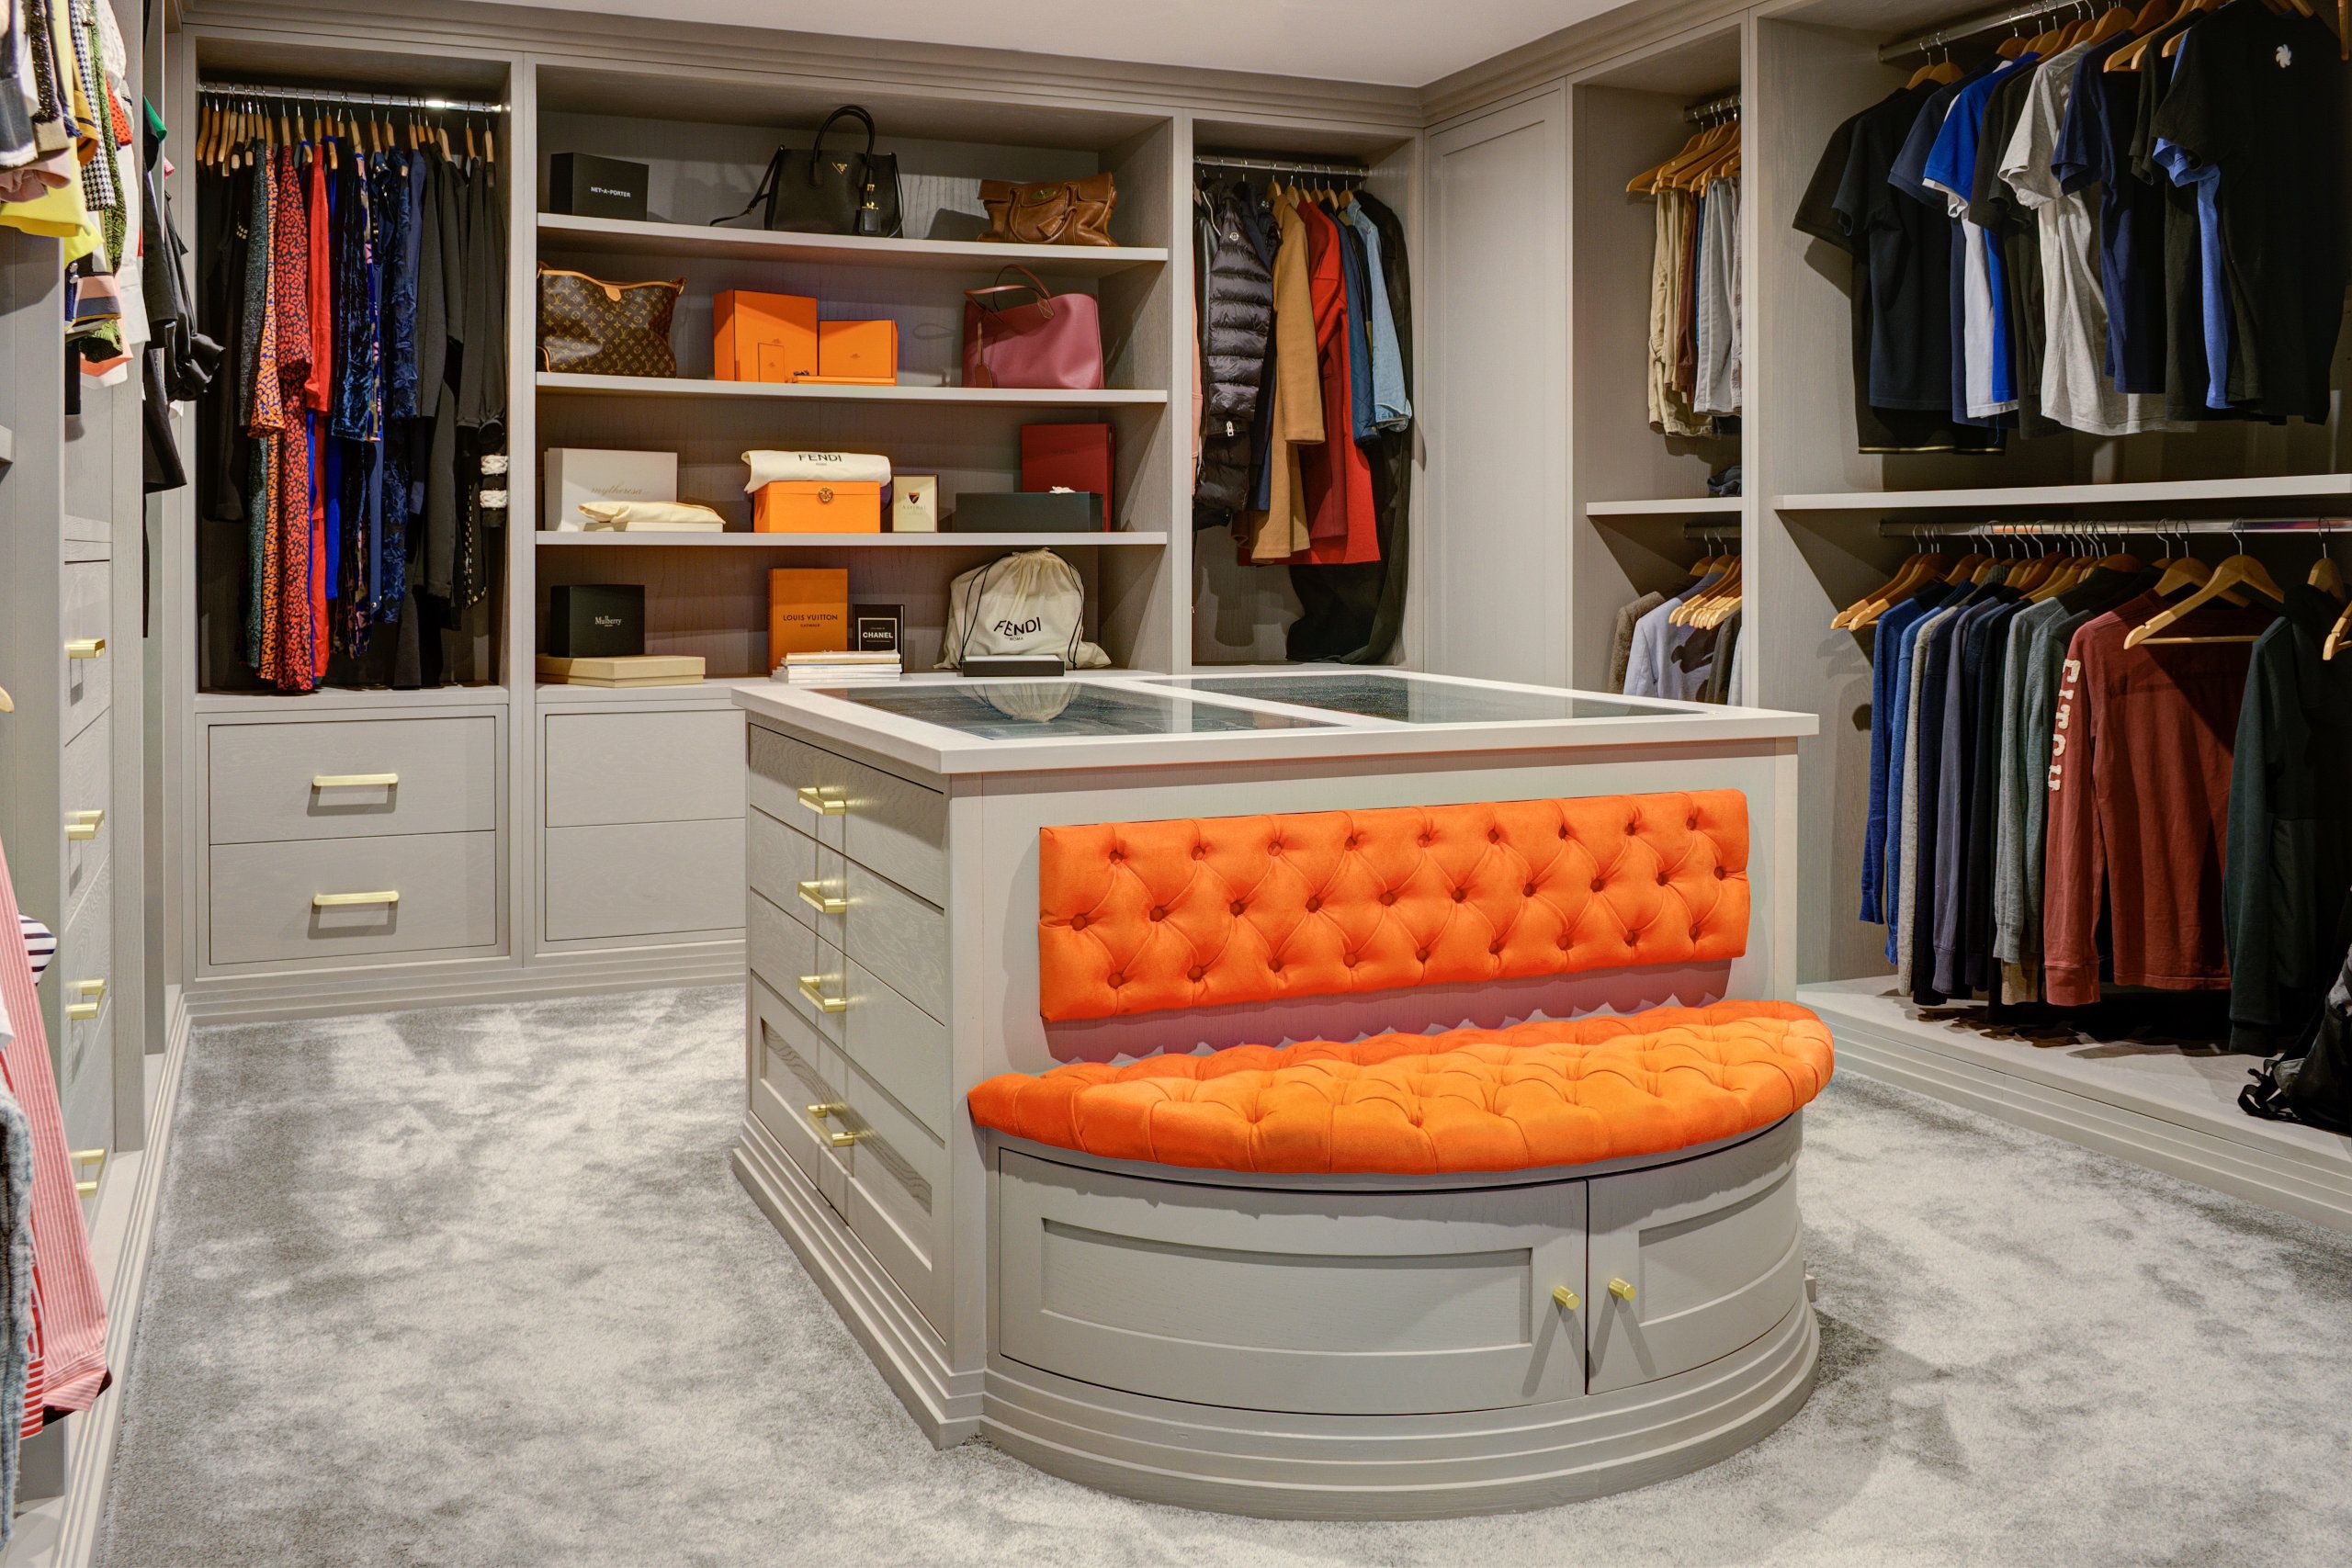 A bespoke dressing room with integrated cabinets surrounding the room. In the centre is a counter, with a striking orange-cushioned ottoman.